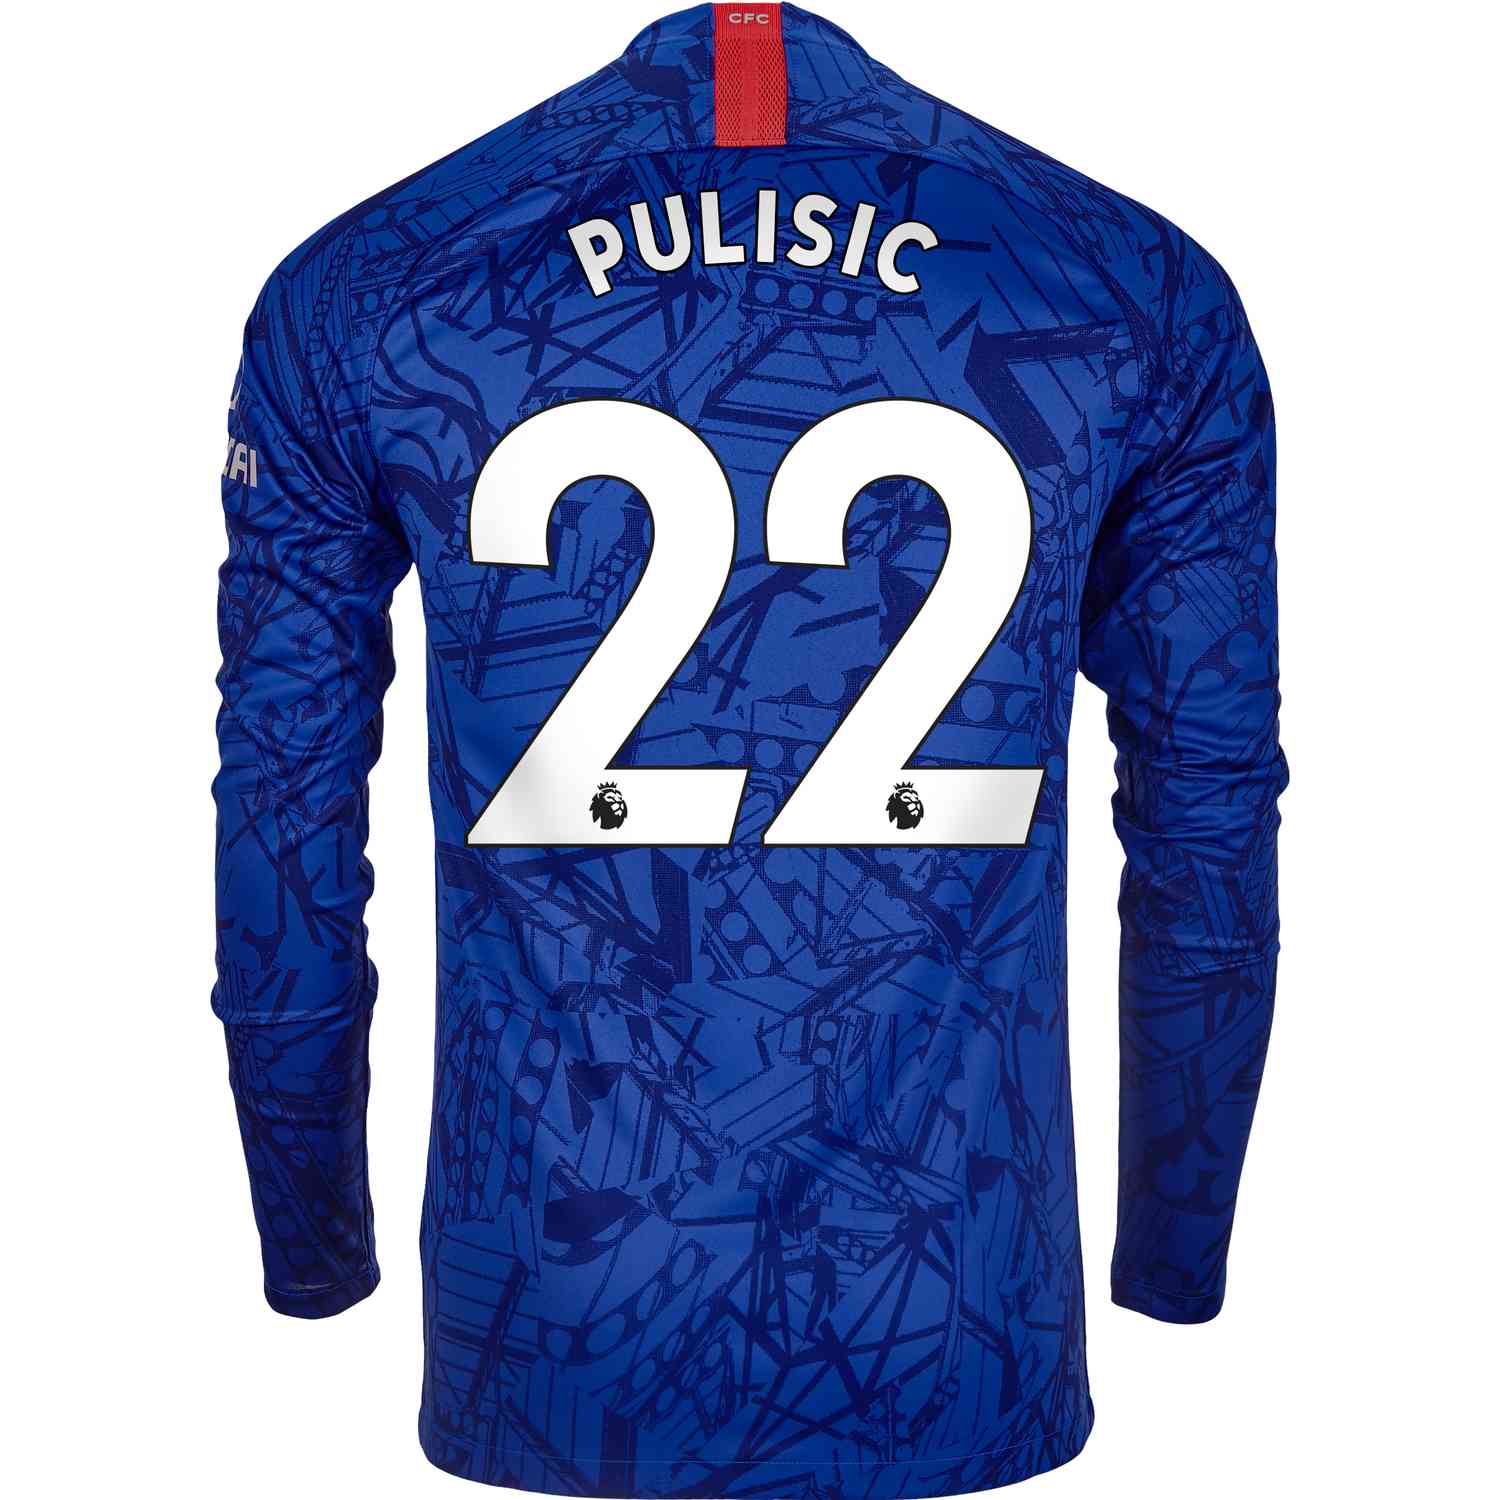 pulisic chelsea jersey youth